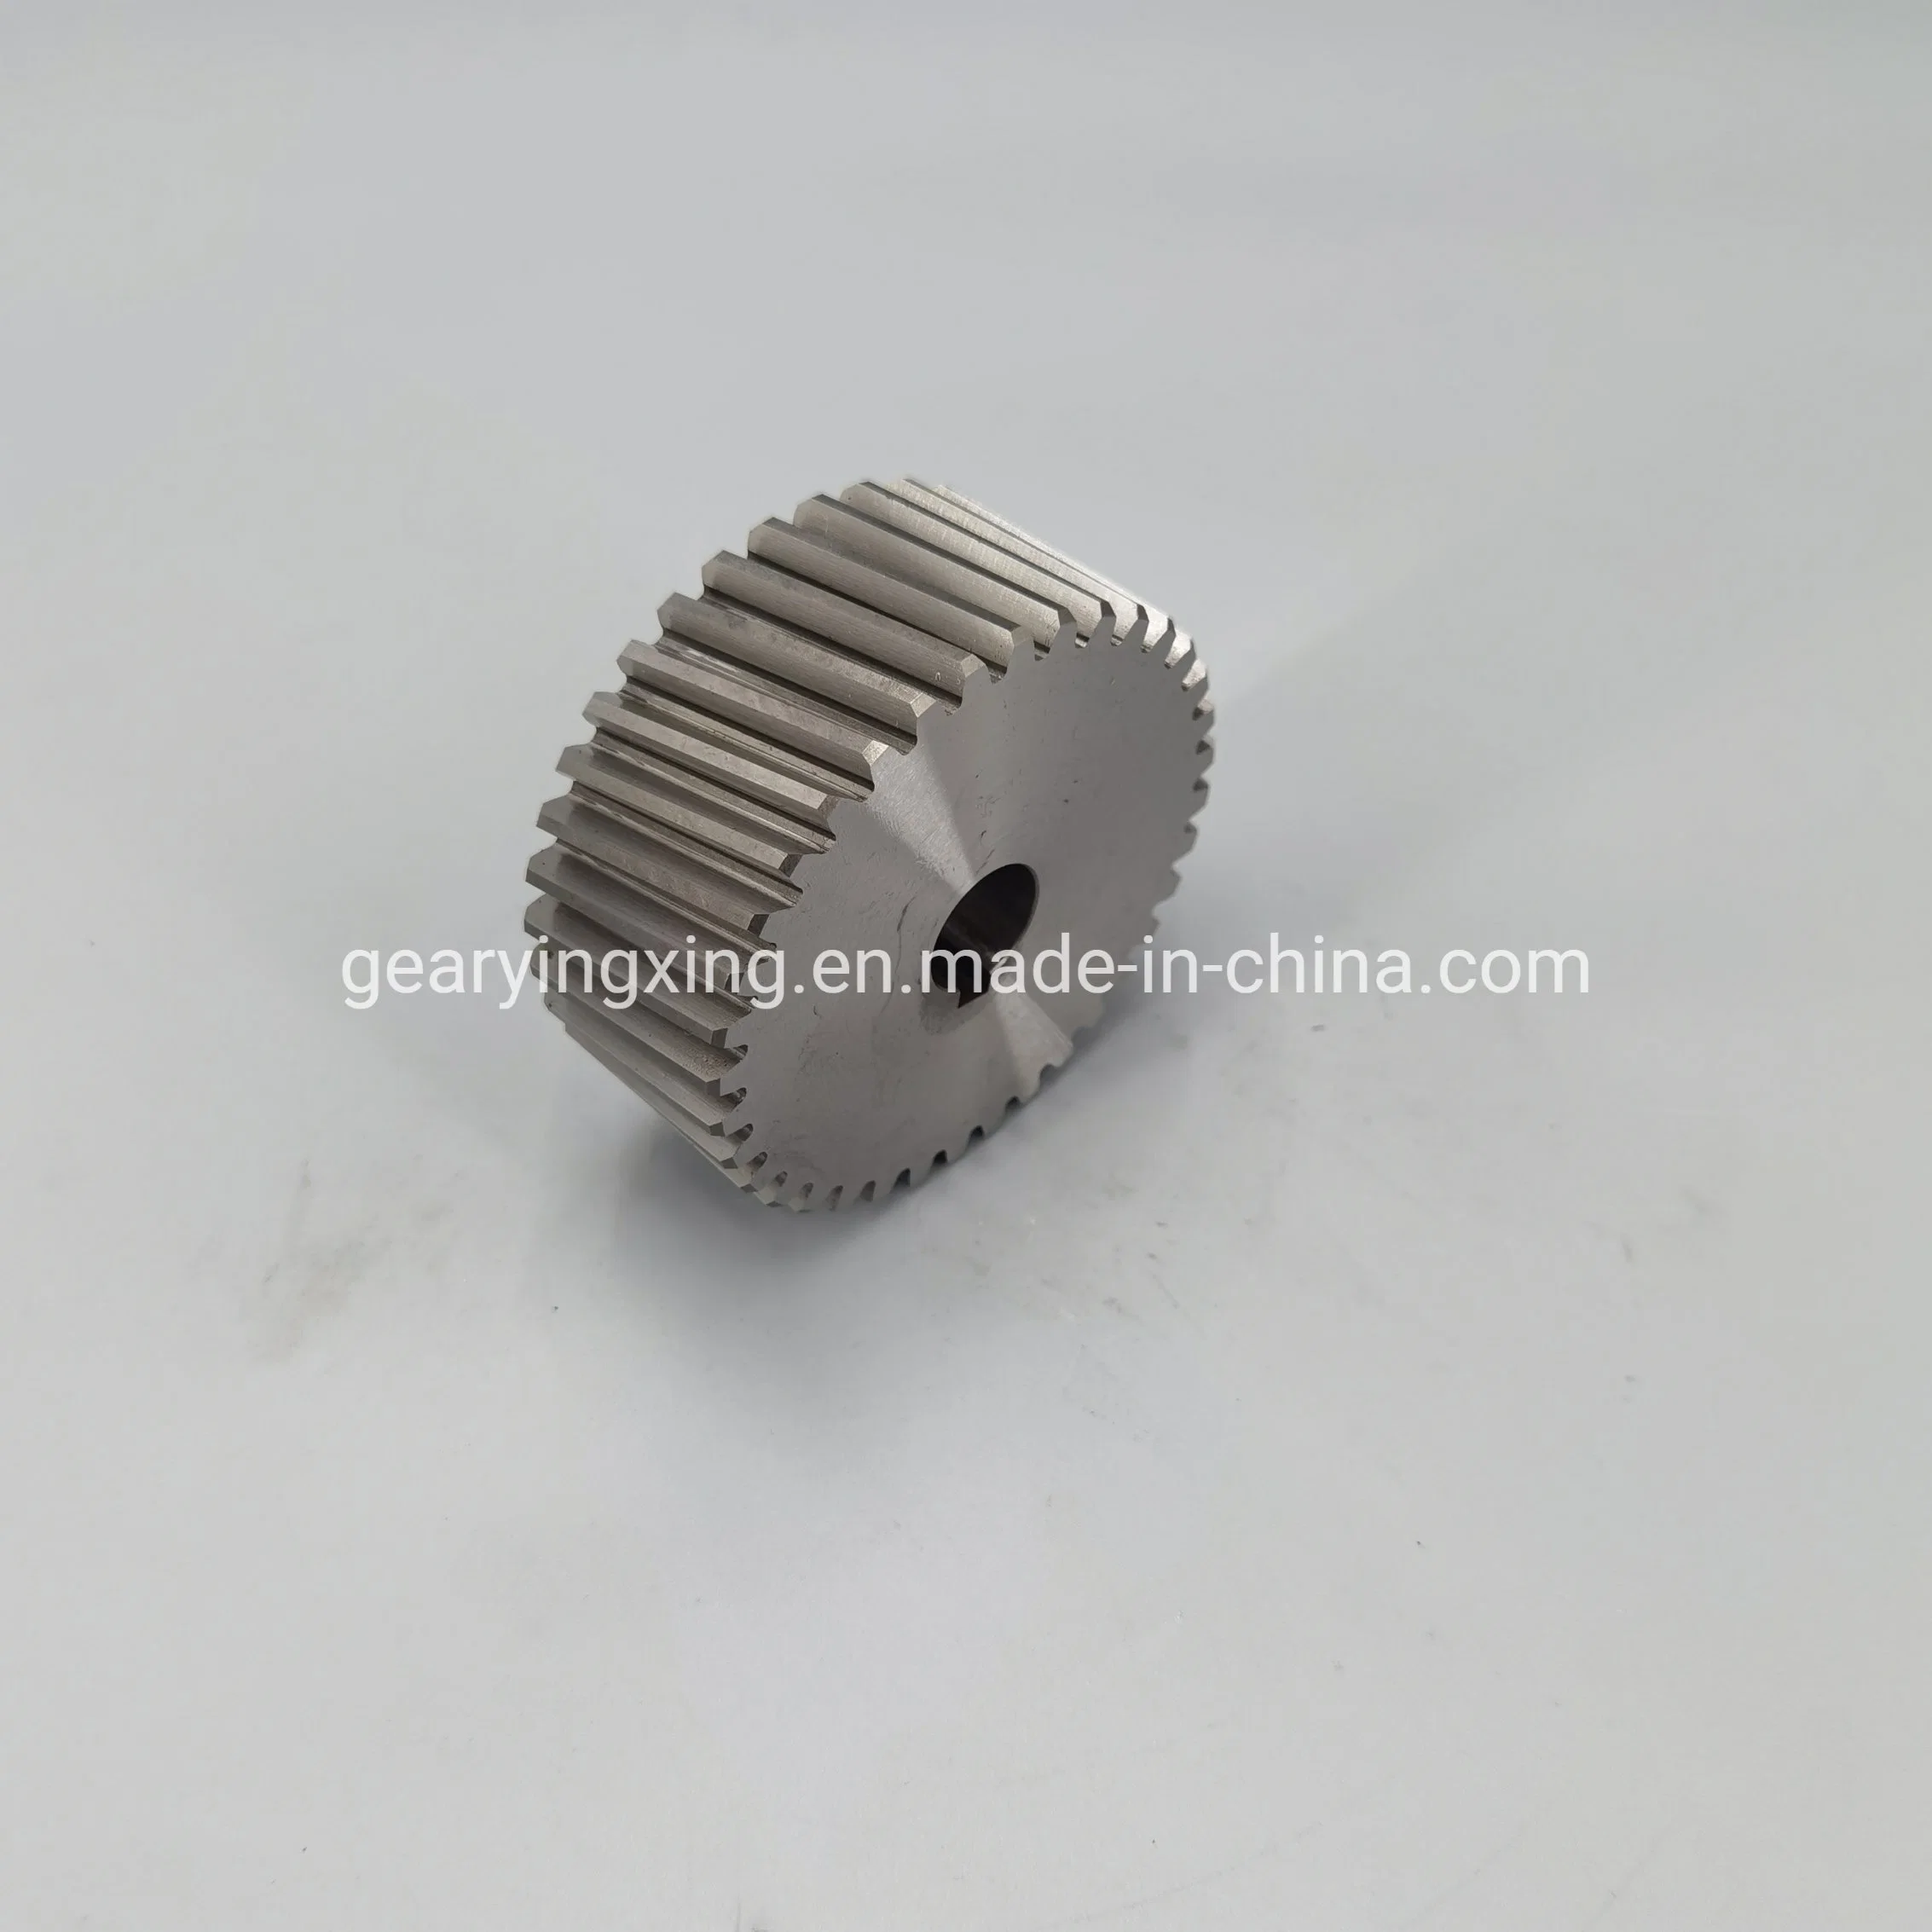 M2.5 Z36 Customized Gear for Drilling Machine/ Reducer/ Pile-Driver Tower/ Oil Machinery